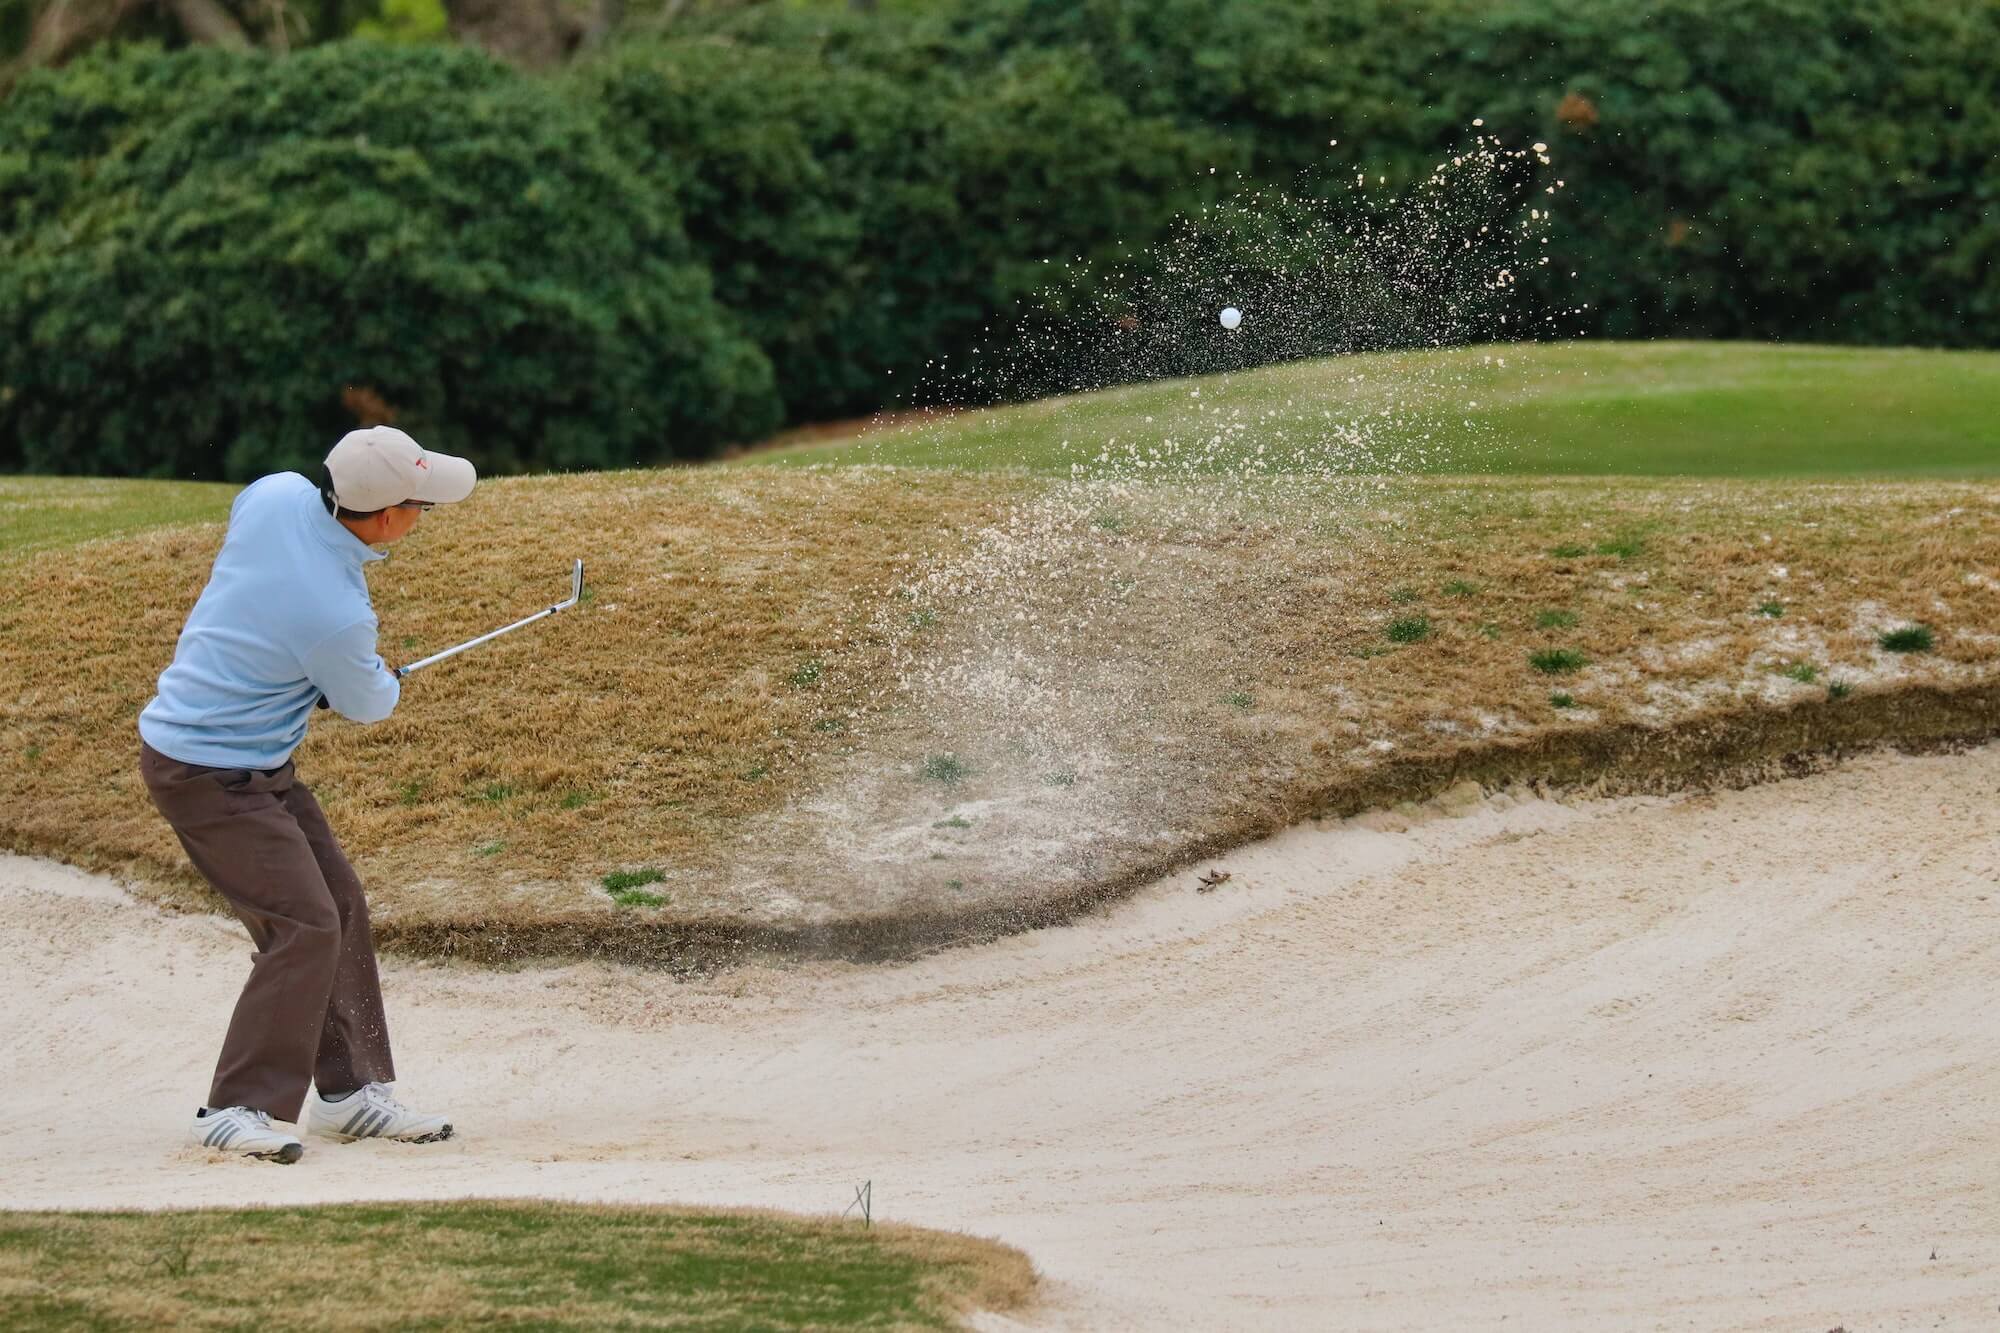 Man taking golf swing from the sand